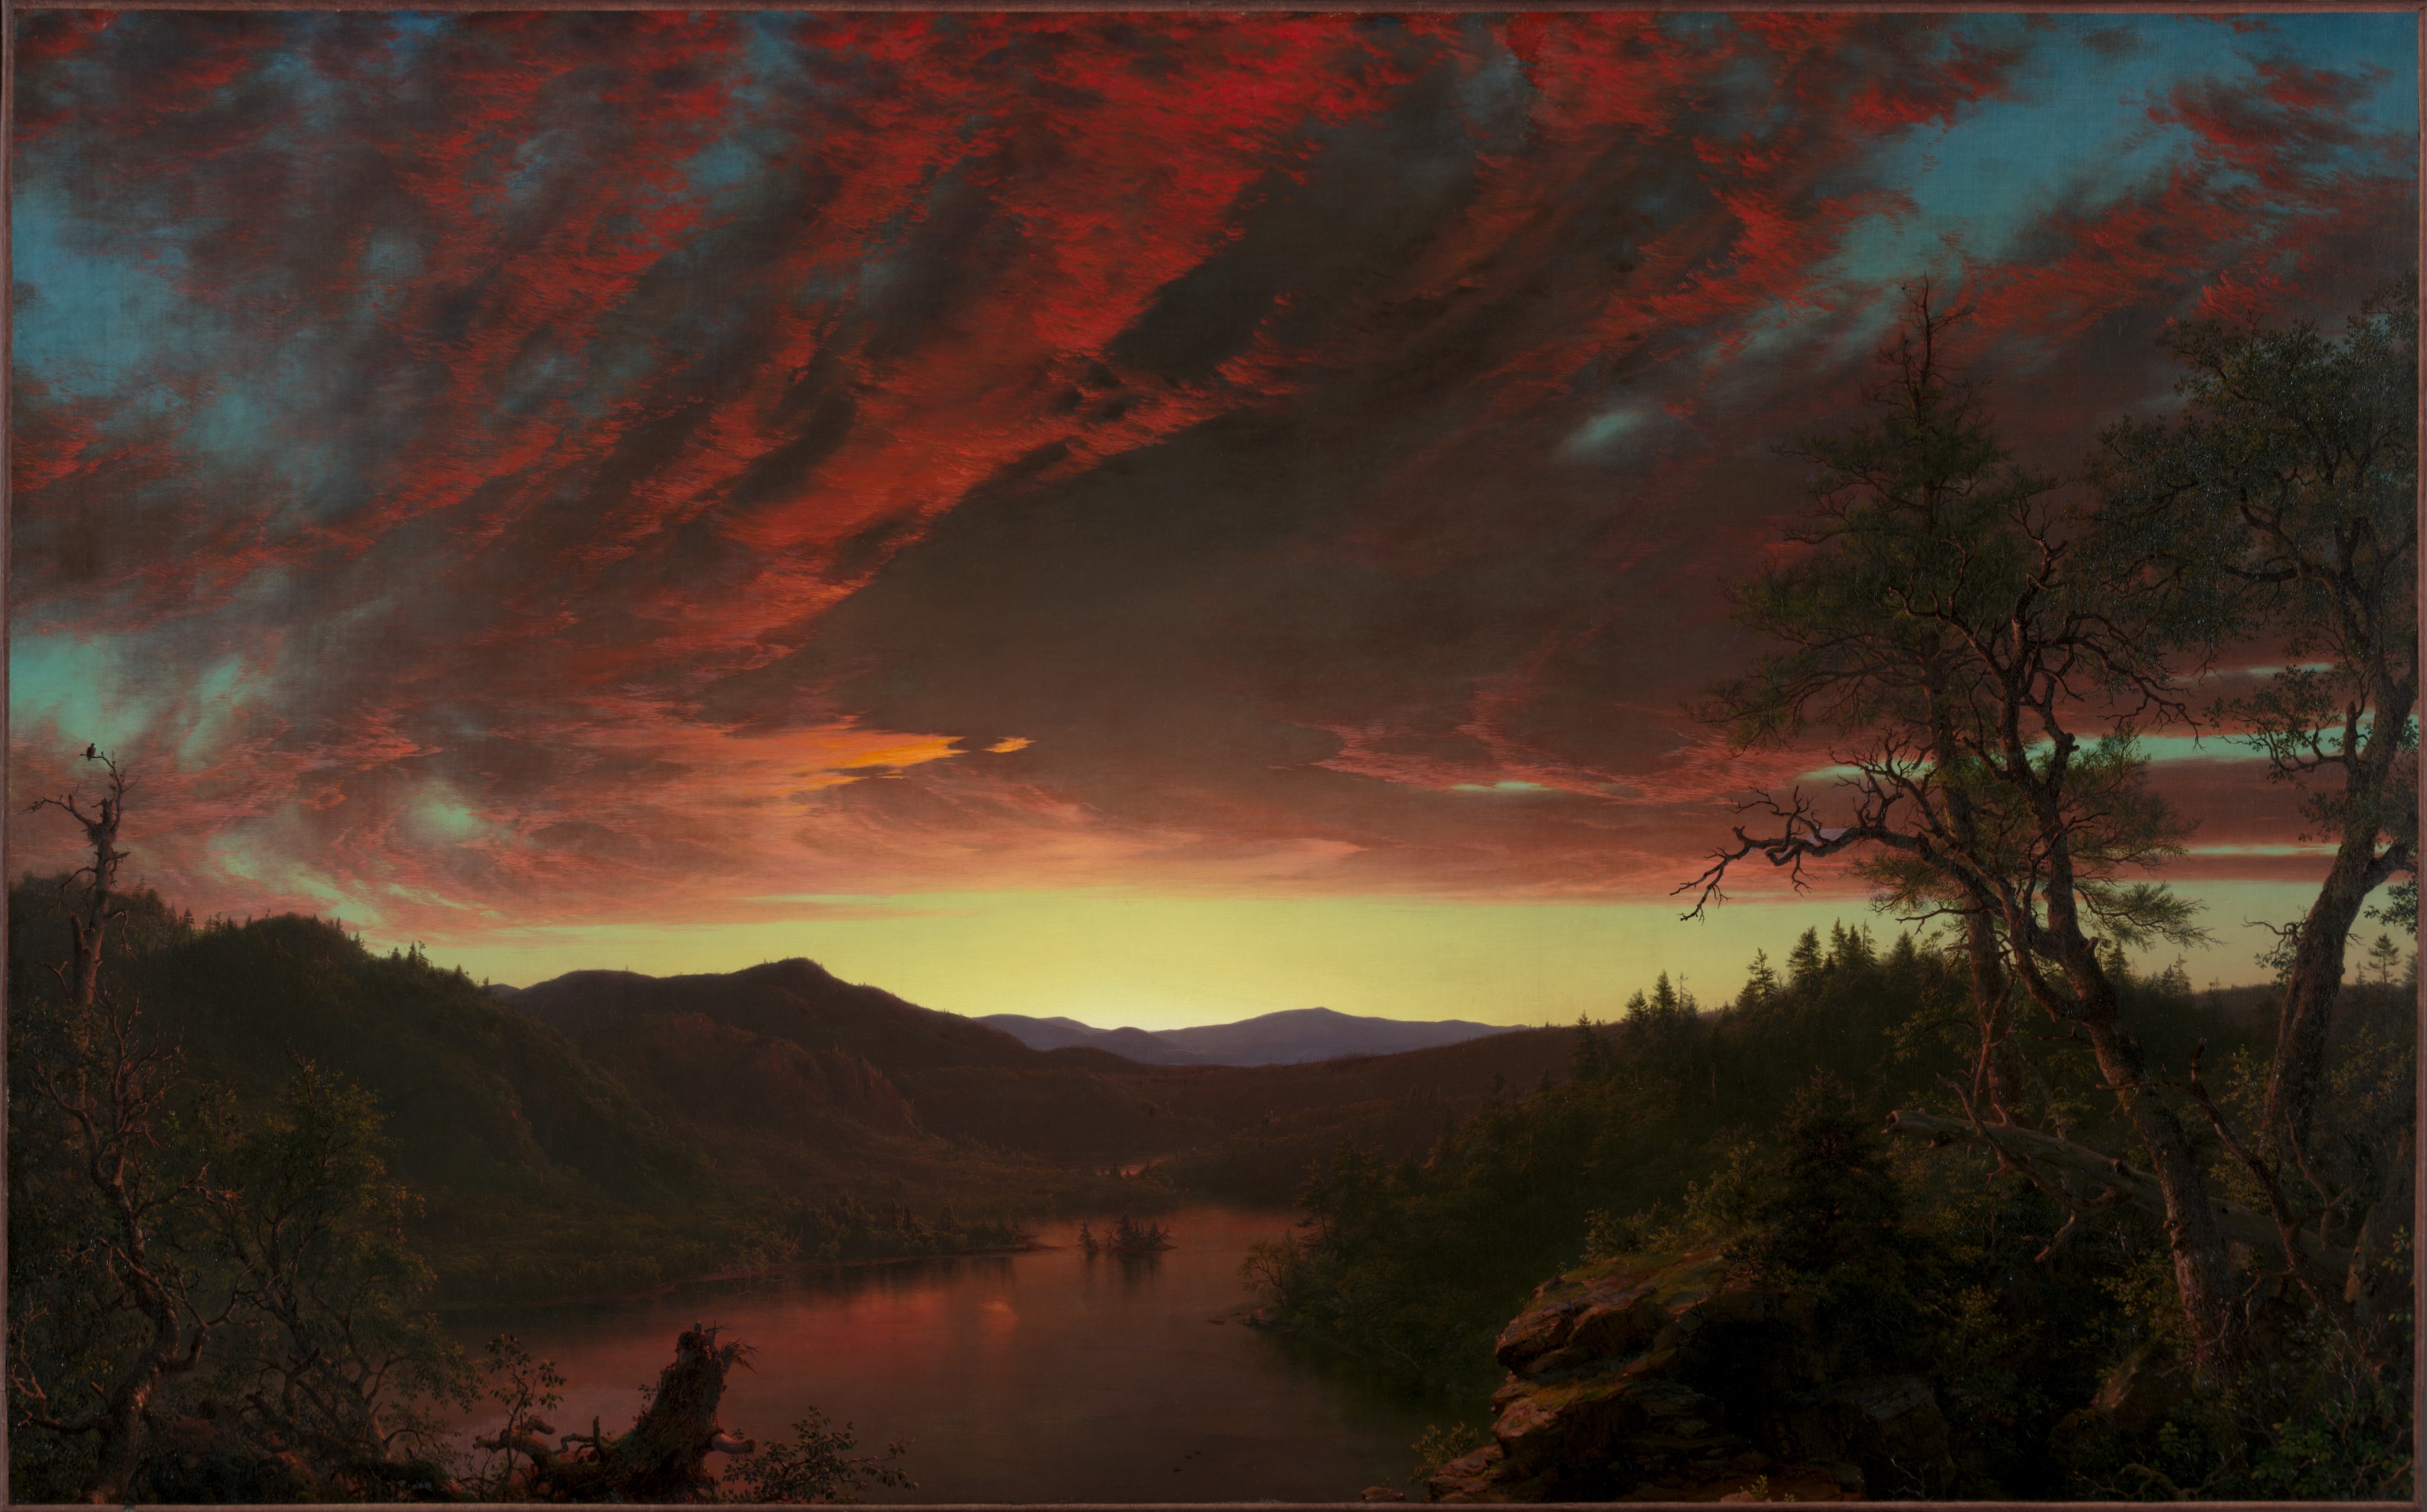 Twilight in the Wilderness by Frederic Edwin Church - 1860 - 101.6 x 162.6 cm Cleveland Museum of Art